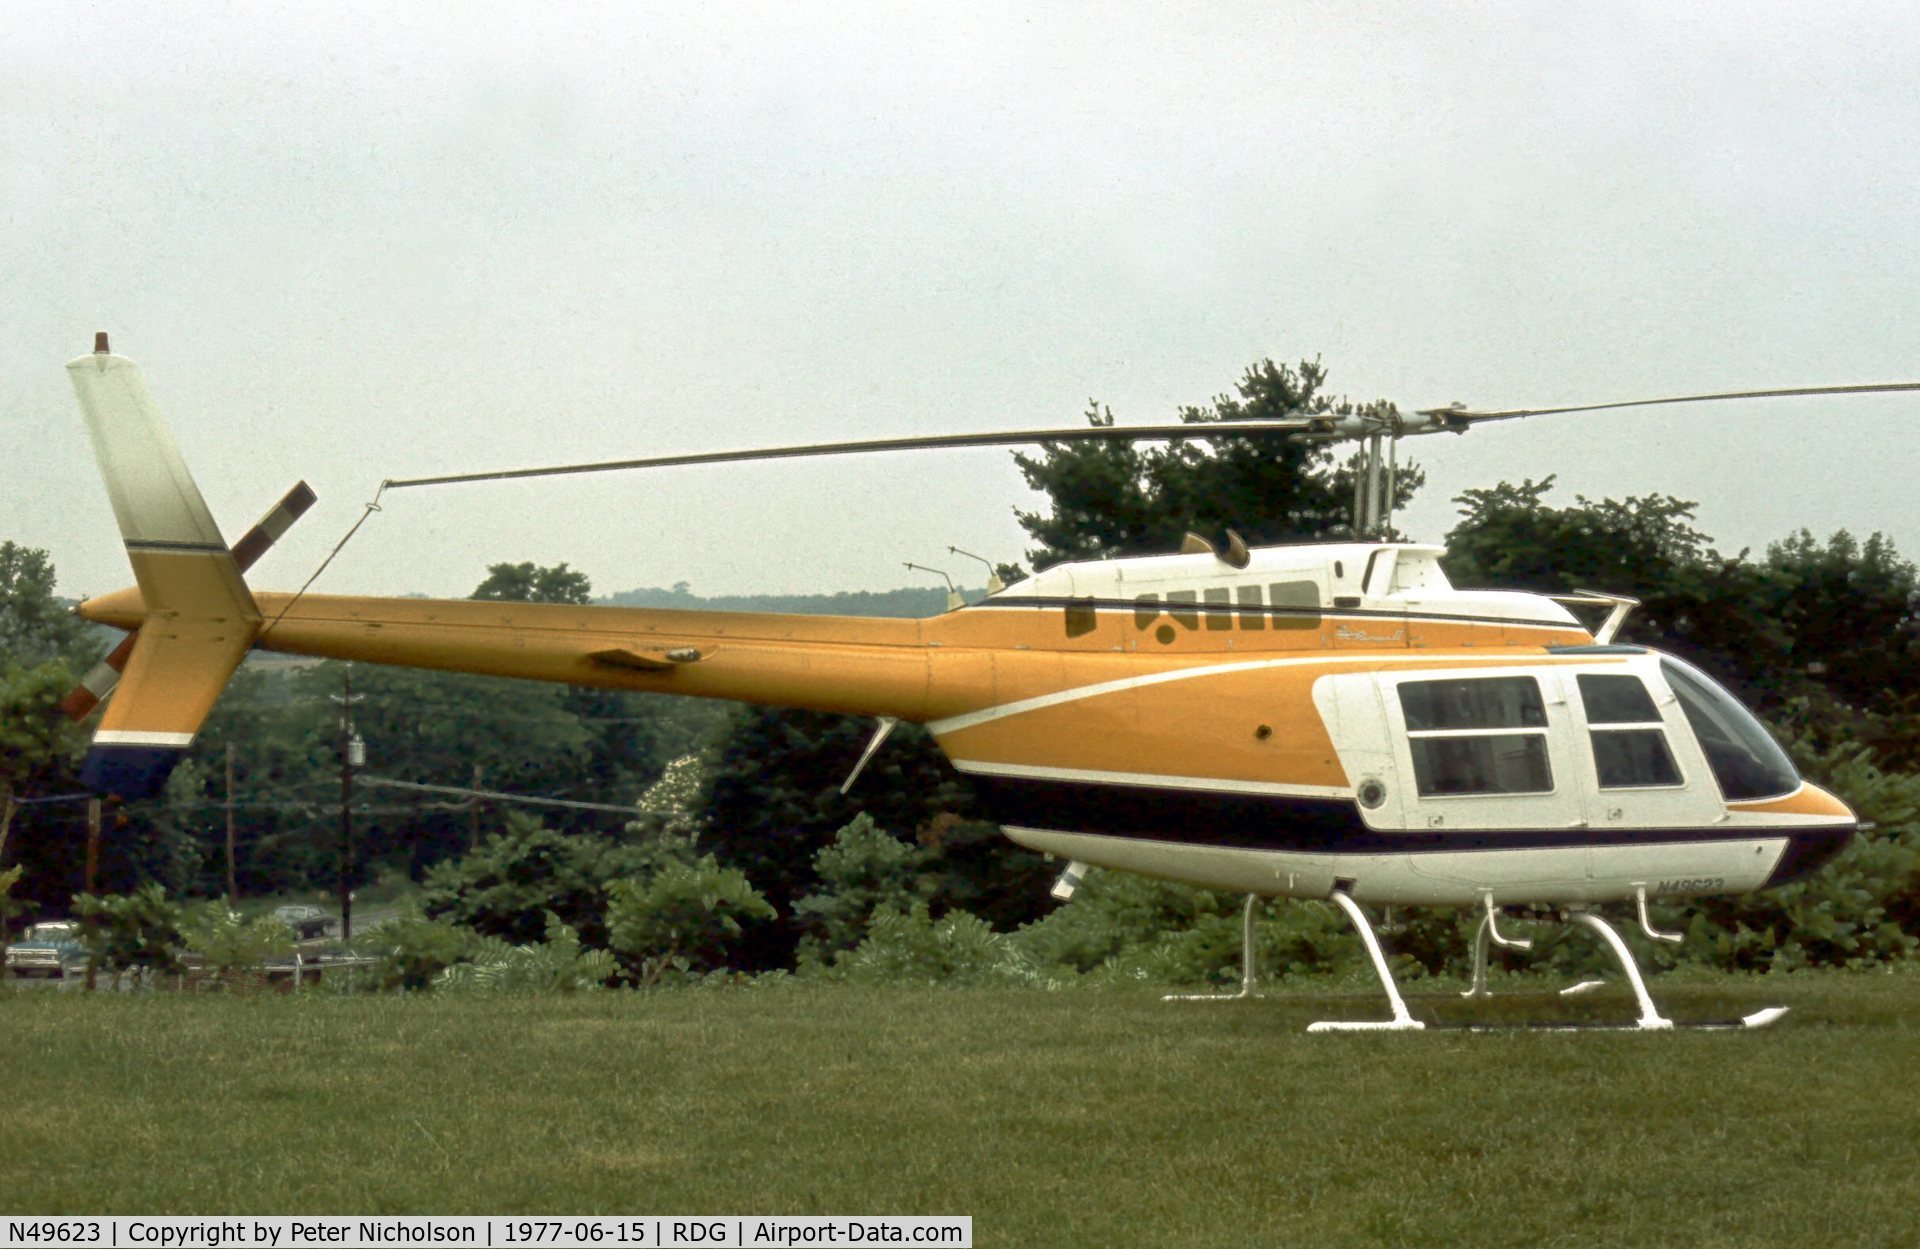 N49623, 1975 Bell 206B C/N 1880, This JetRanger II was present at the 1977 Reading Airshow.